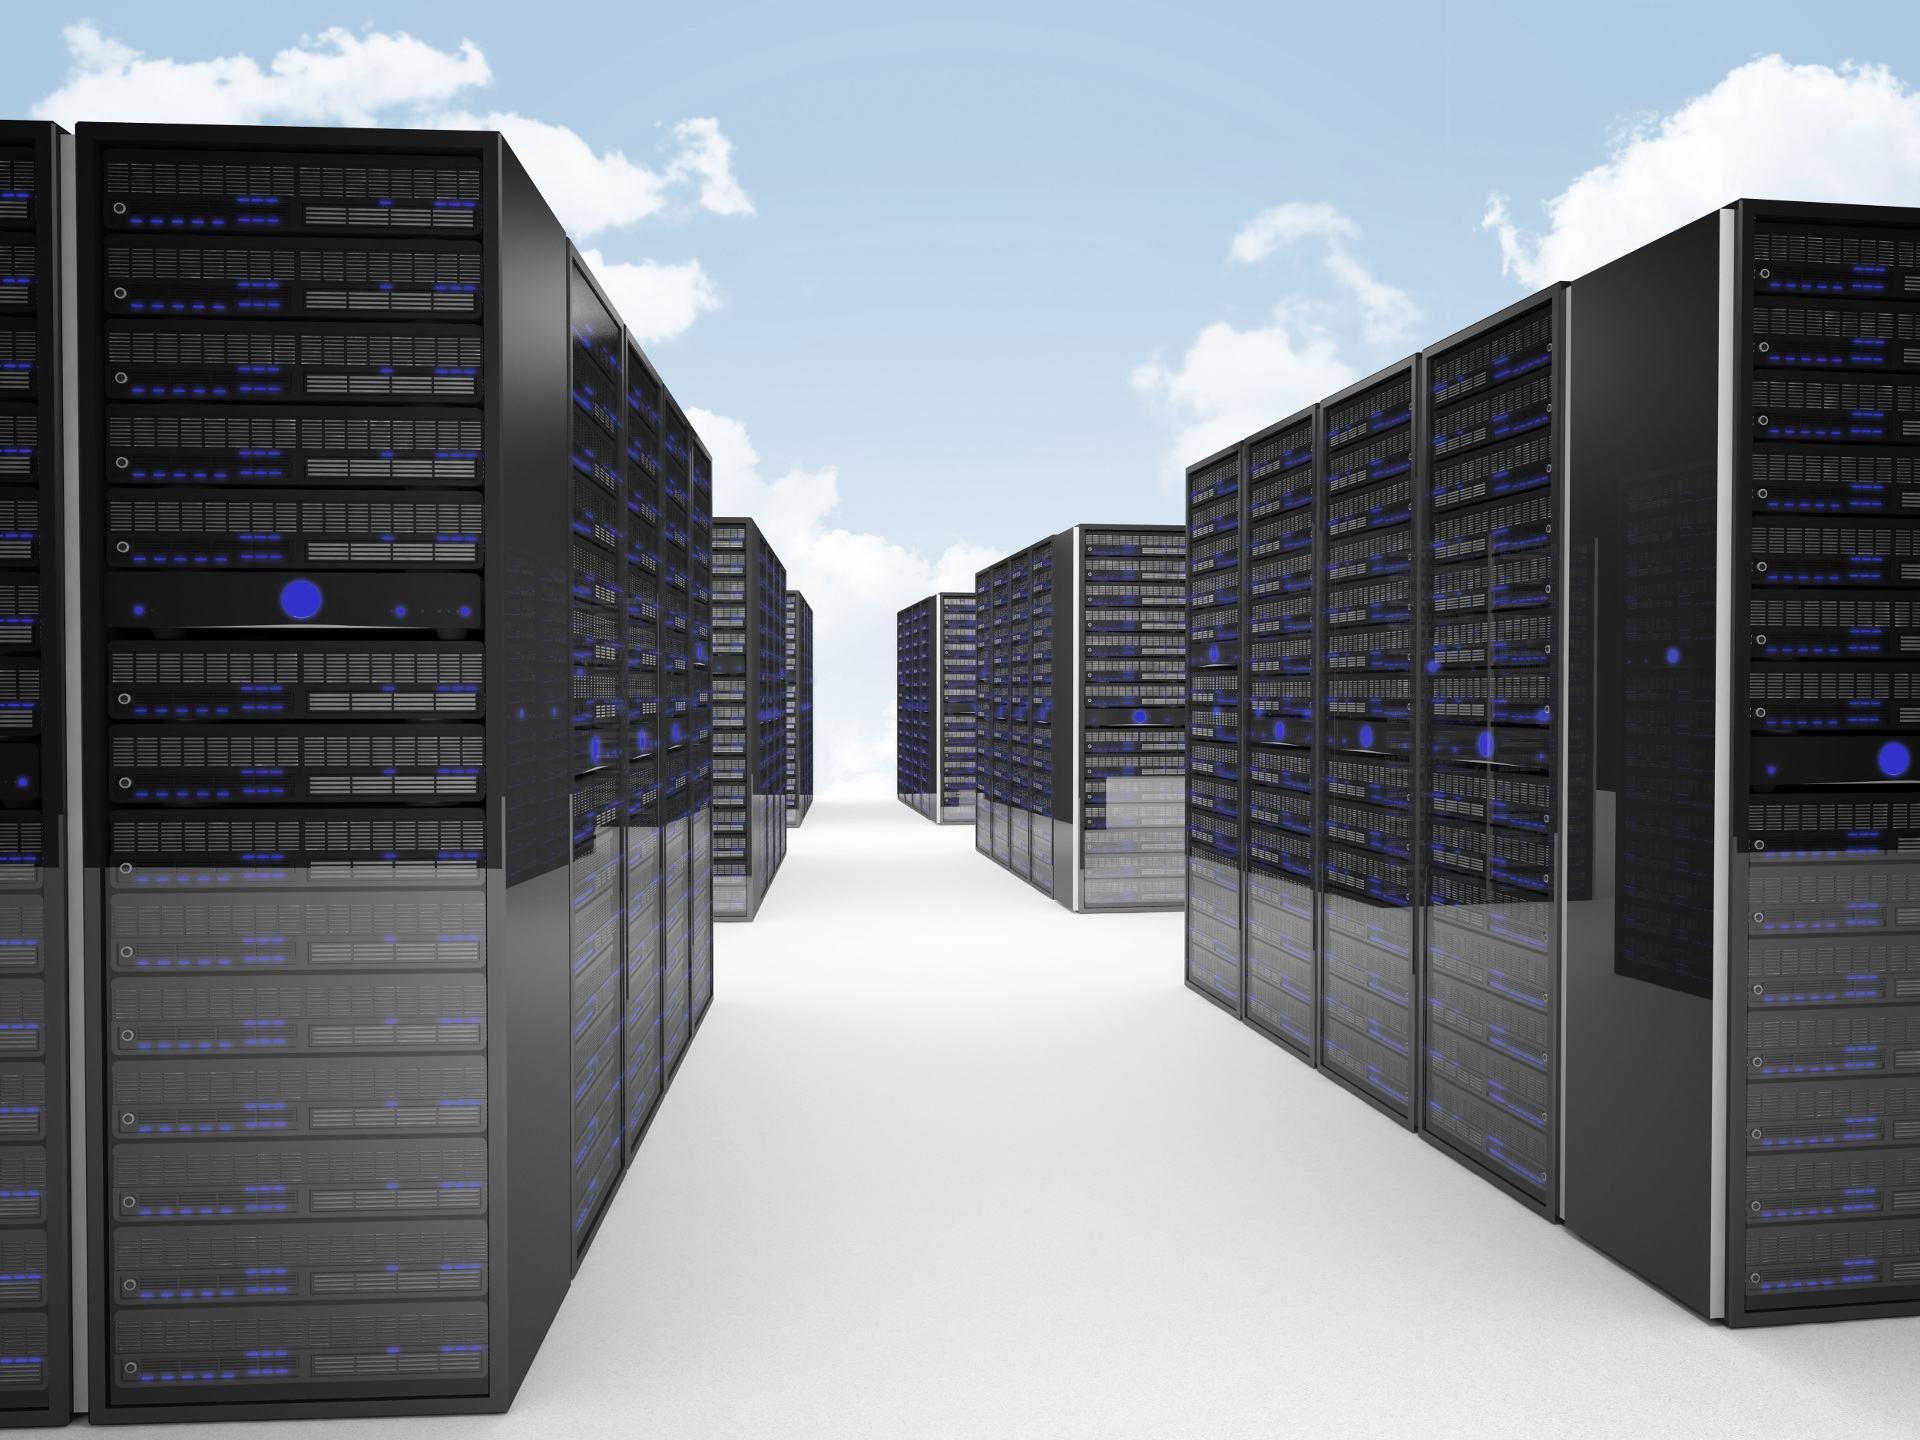 3d image of datacenter and blue sky